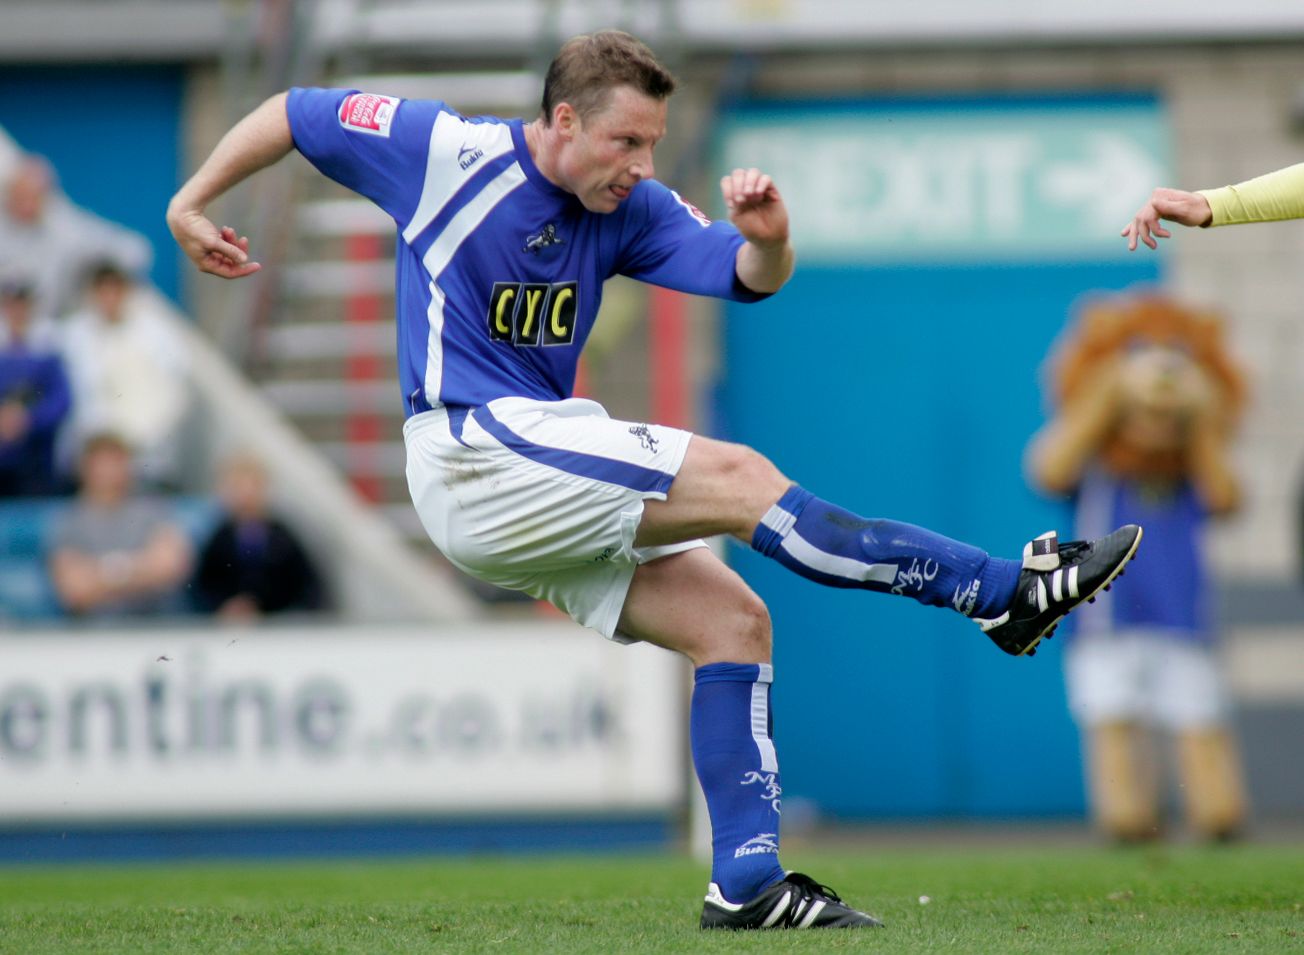 Football - Millwall v Leeds United - Coca-Cola Football League One Play-Off Semi Final First Leg - The New Den - 08/09 - 9/5/09 
Neil Harris scores the first goal for Millwall 
Mandatory Credit: Action Images / David Field